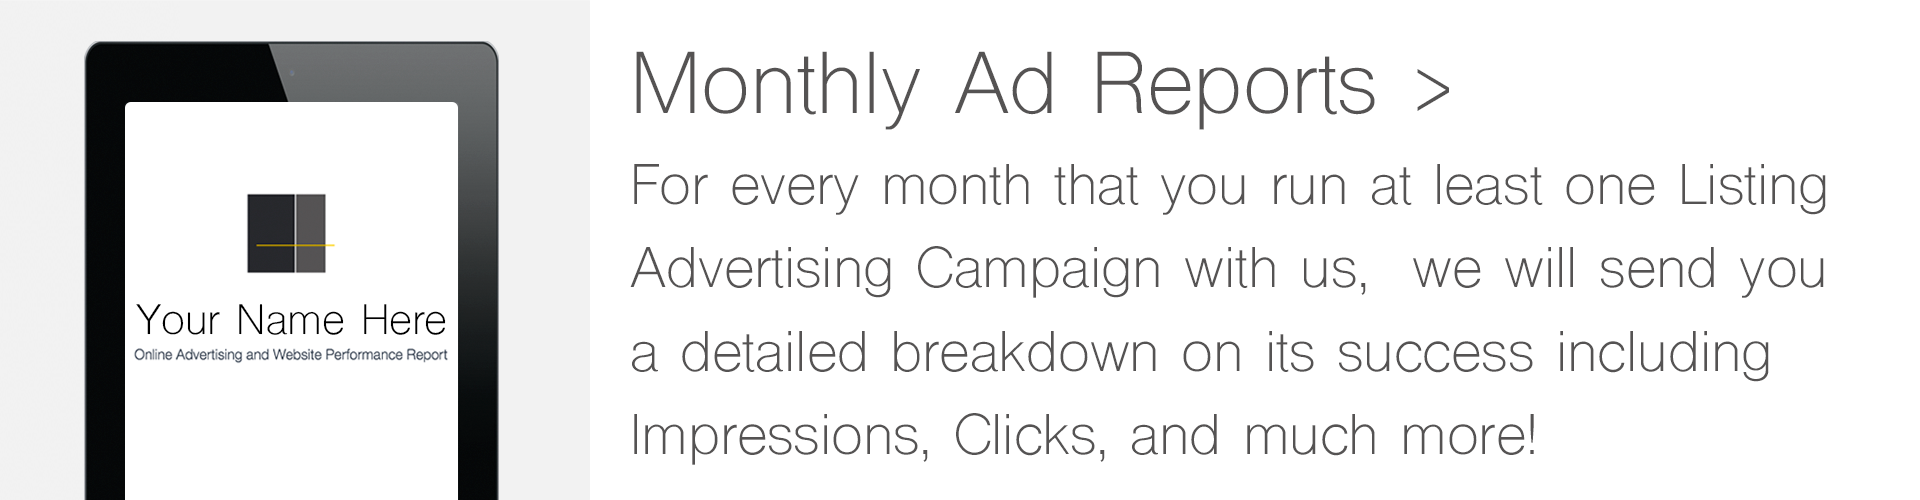 Monthly-Ad-Reports-long